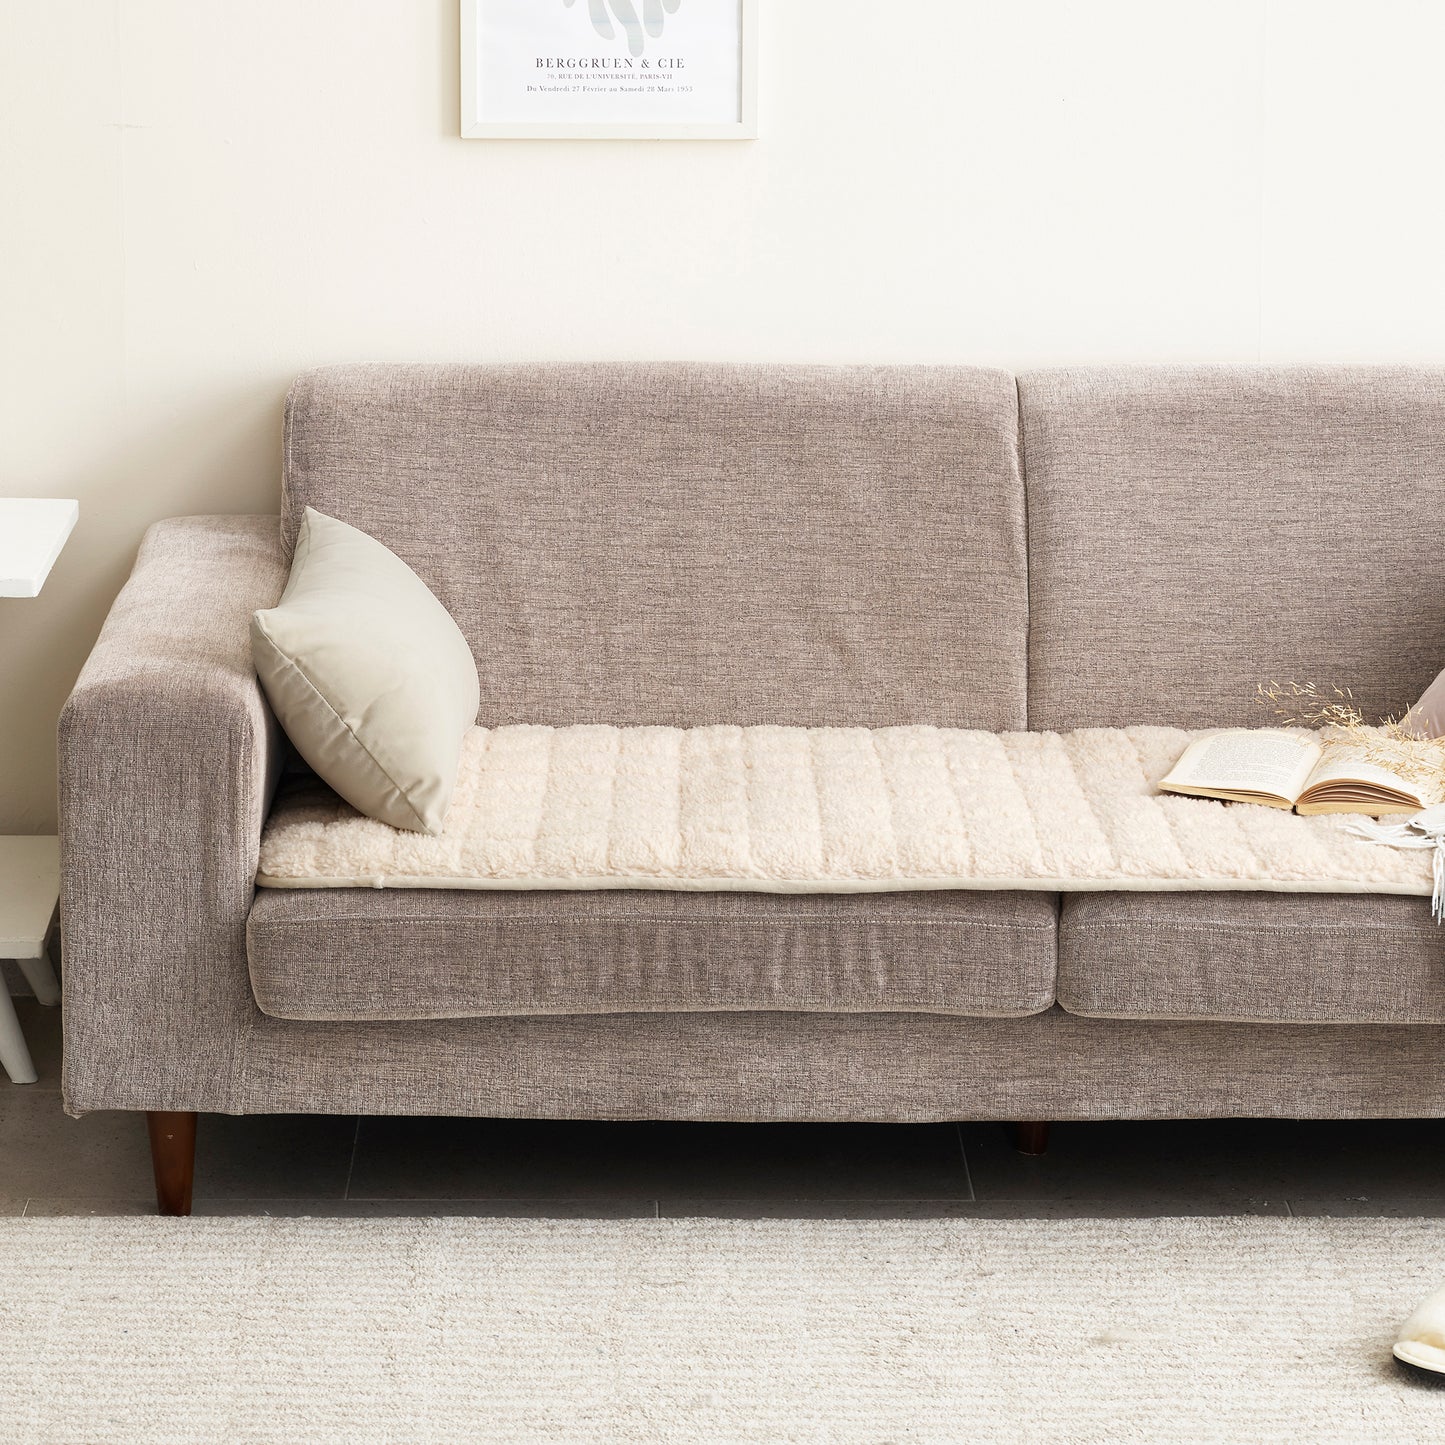 {NEW} Wool Like Soft and Warm touch Sofa pad